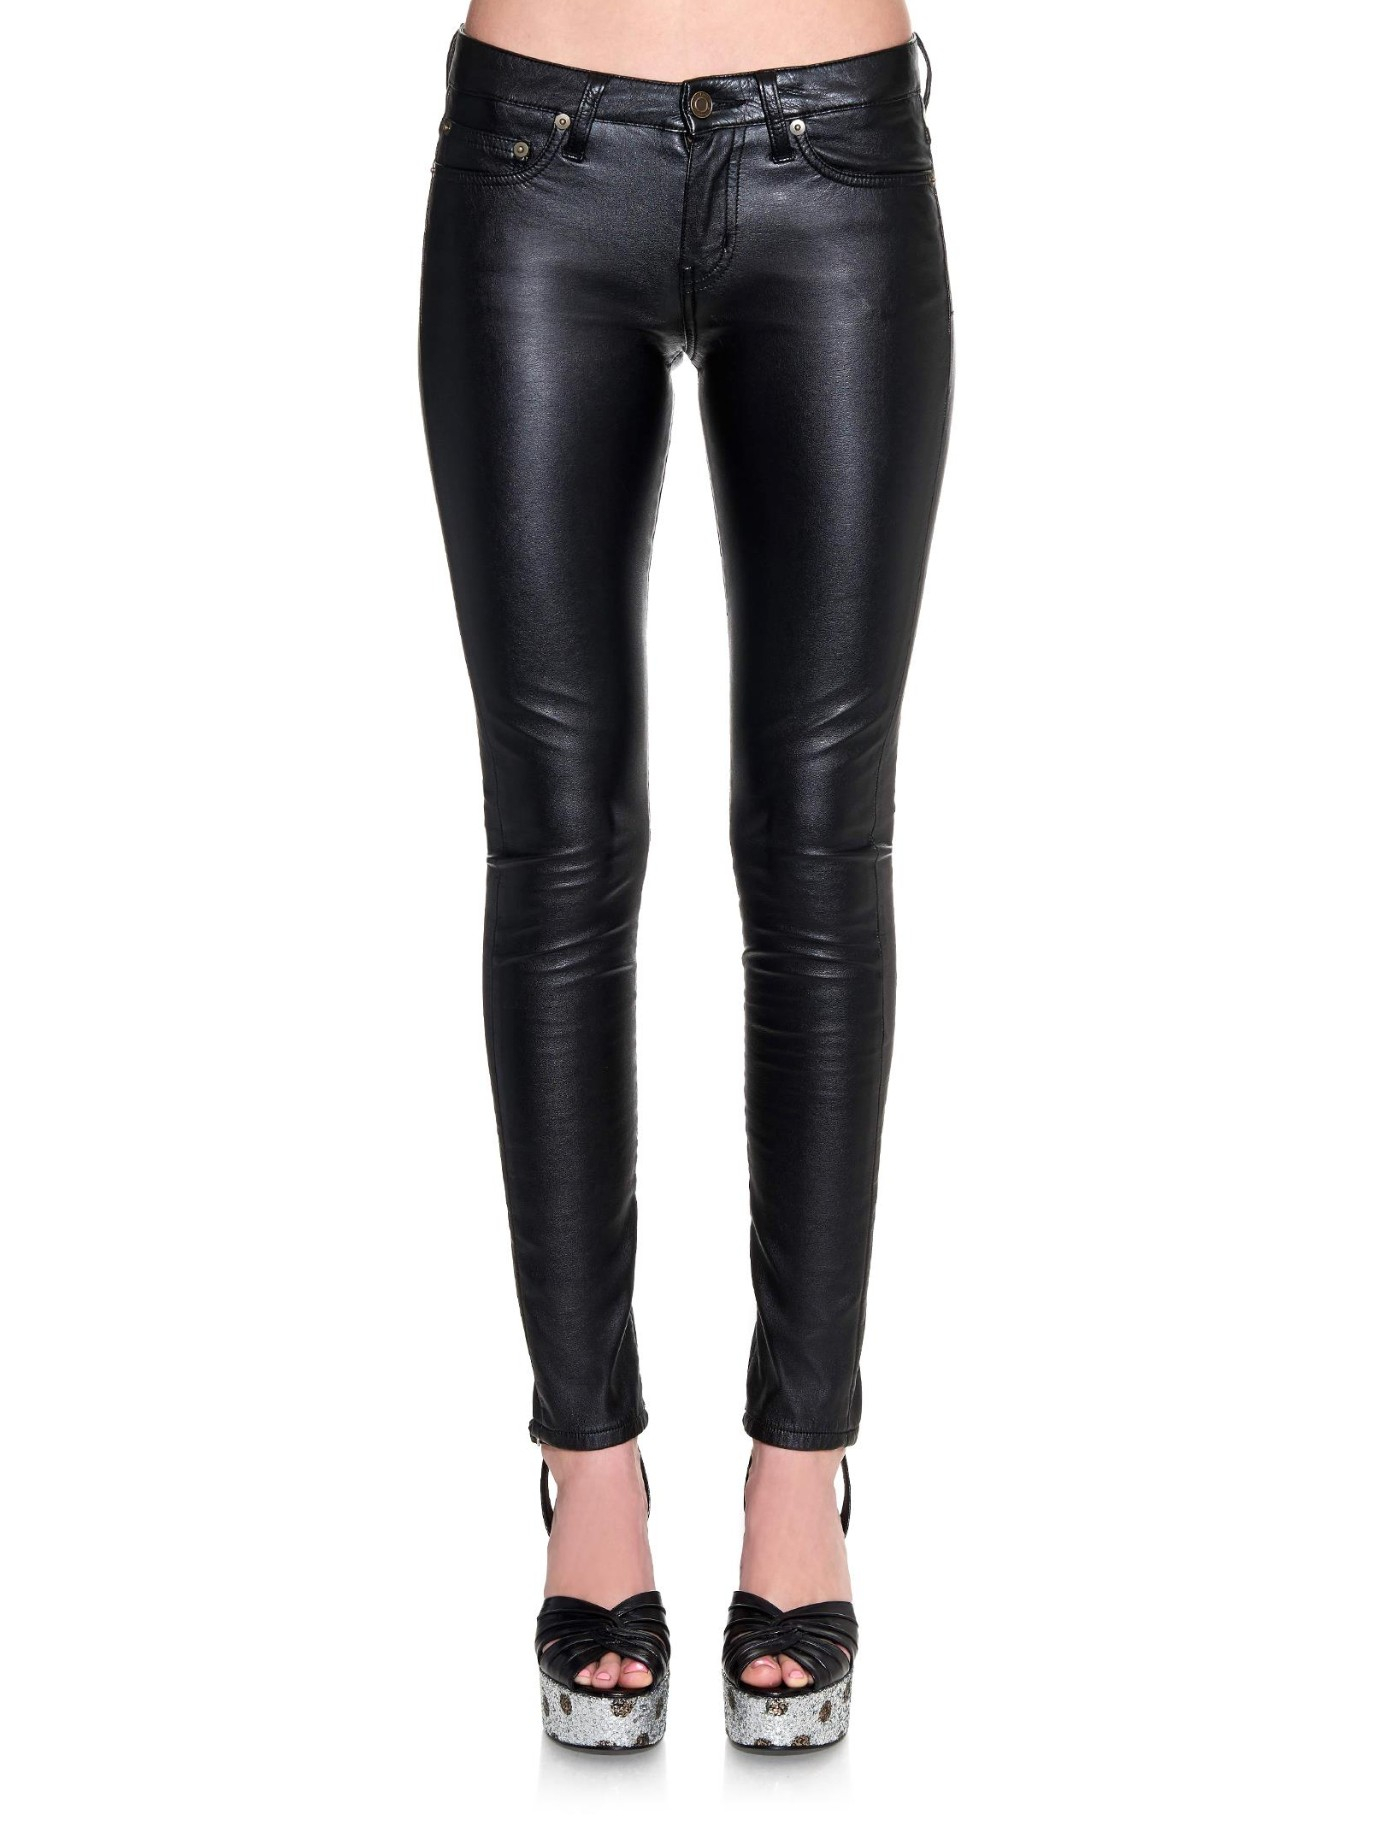 Saint Laurent Low-Rise Skinny Faux-Leather Trousers in Black | Lyst